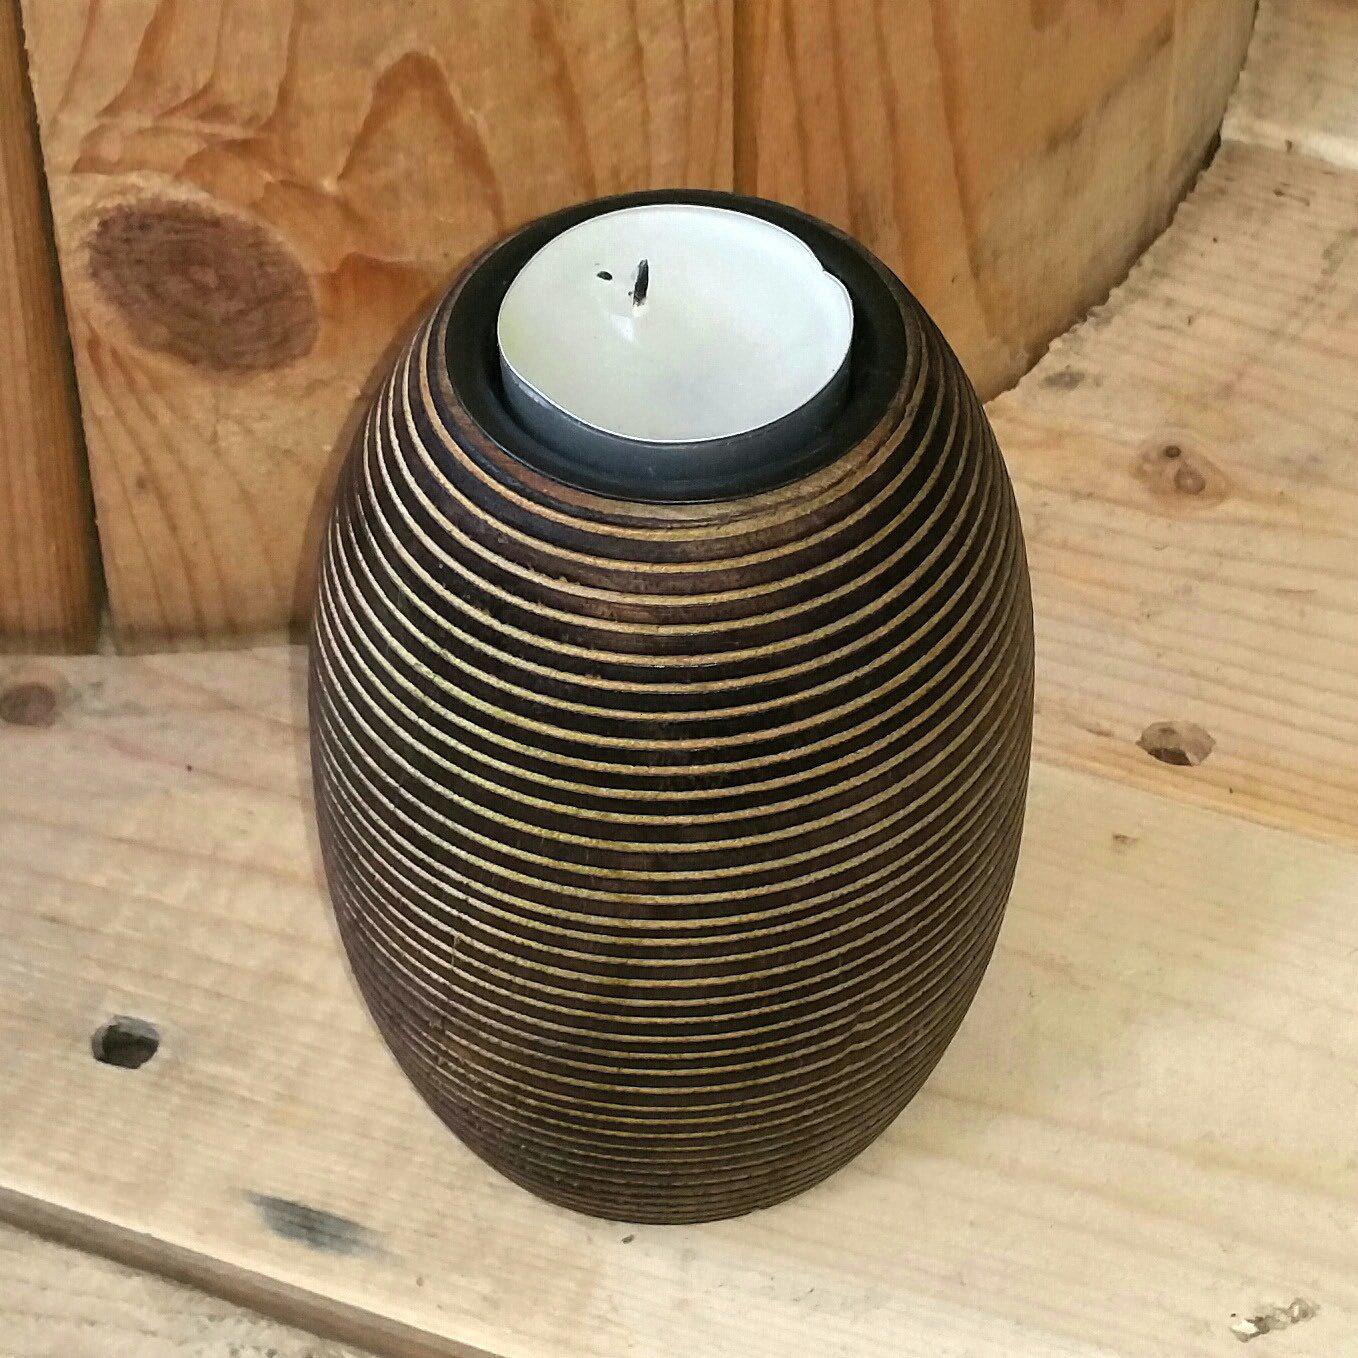 Spiral Rings Tealight Holder-Decor-in2ition mercantile